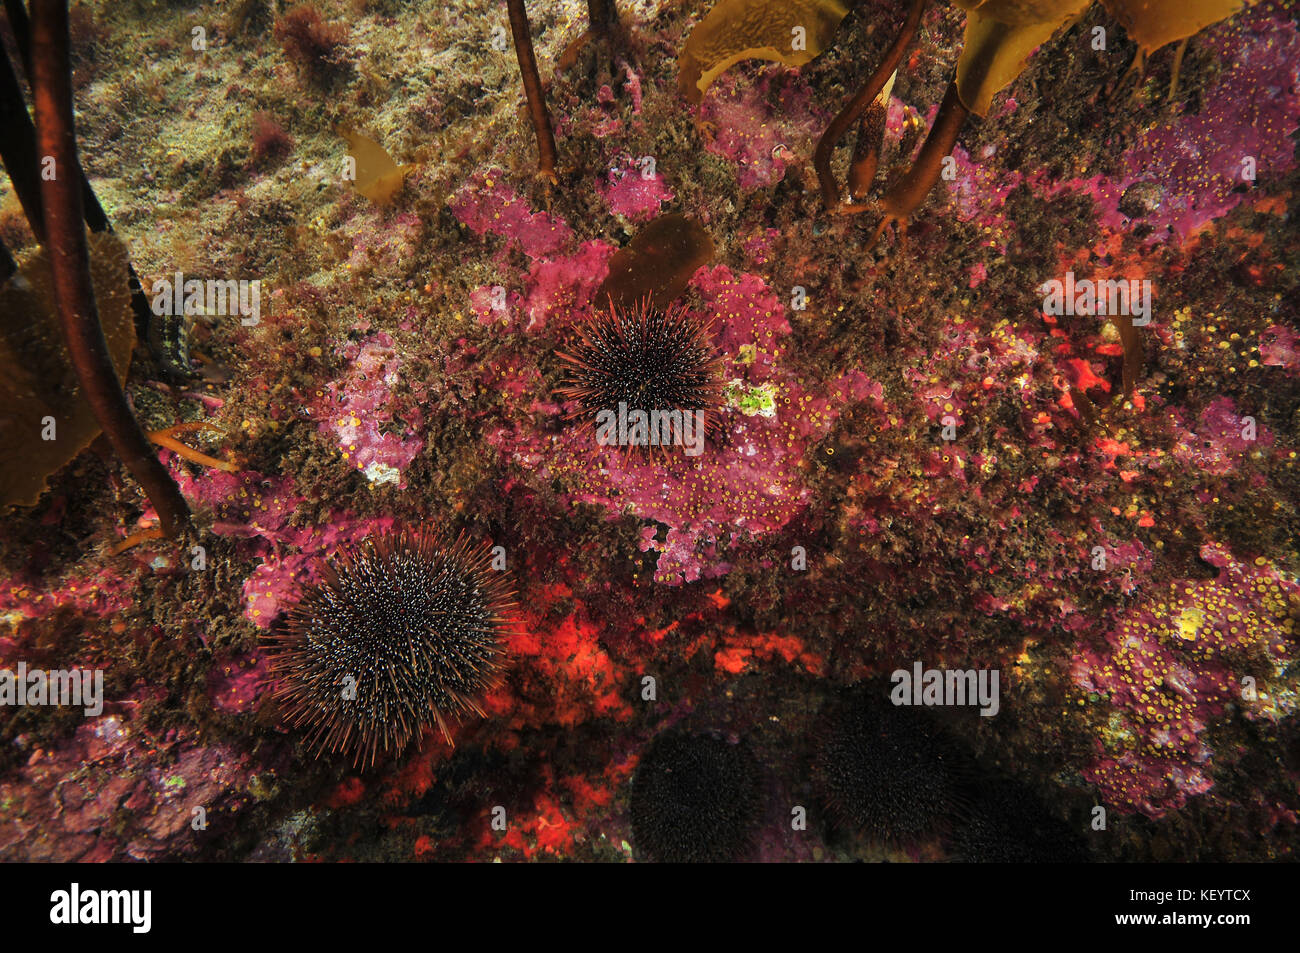 Rocky reef in shade of kelp canopy covered with encrusting invertebrates and hard coralline algae with some sea urchins on it. Stock Photo